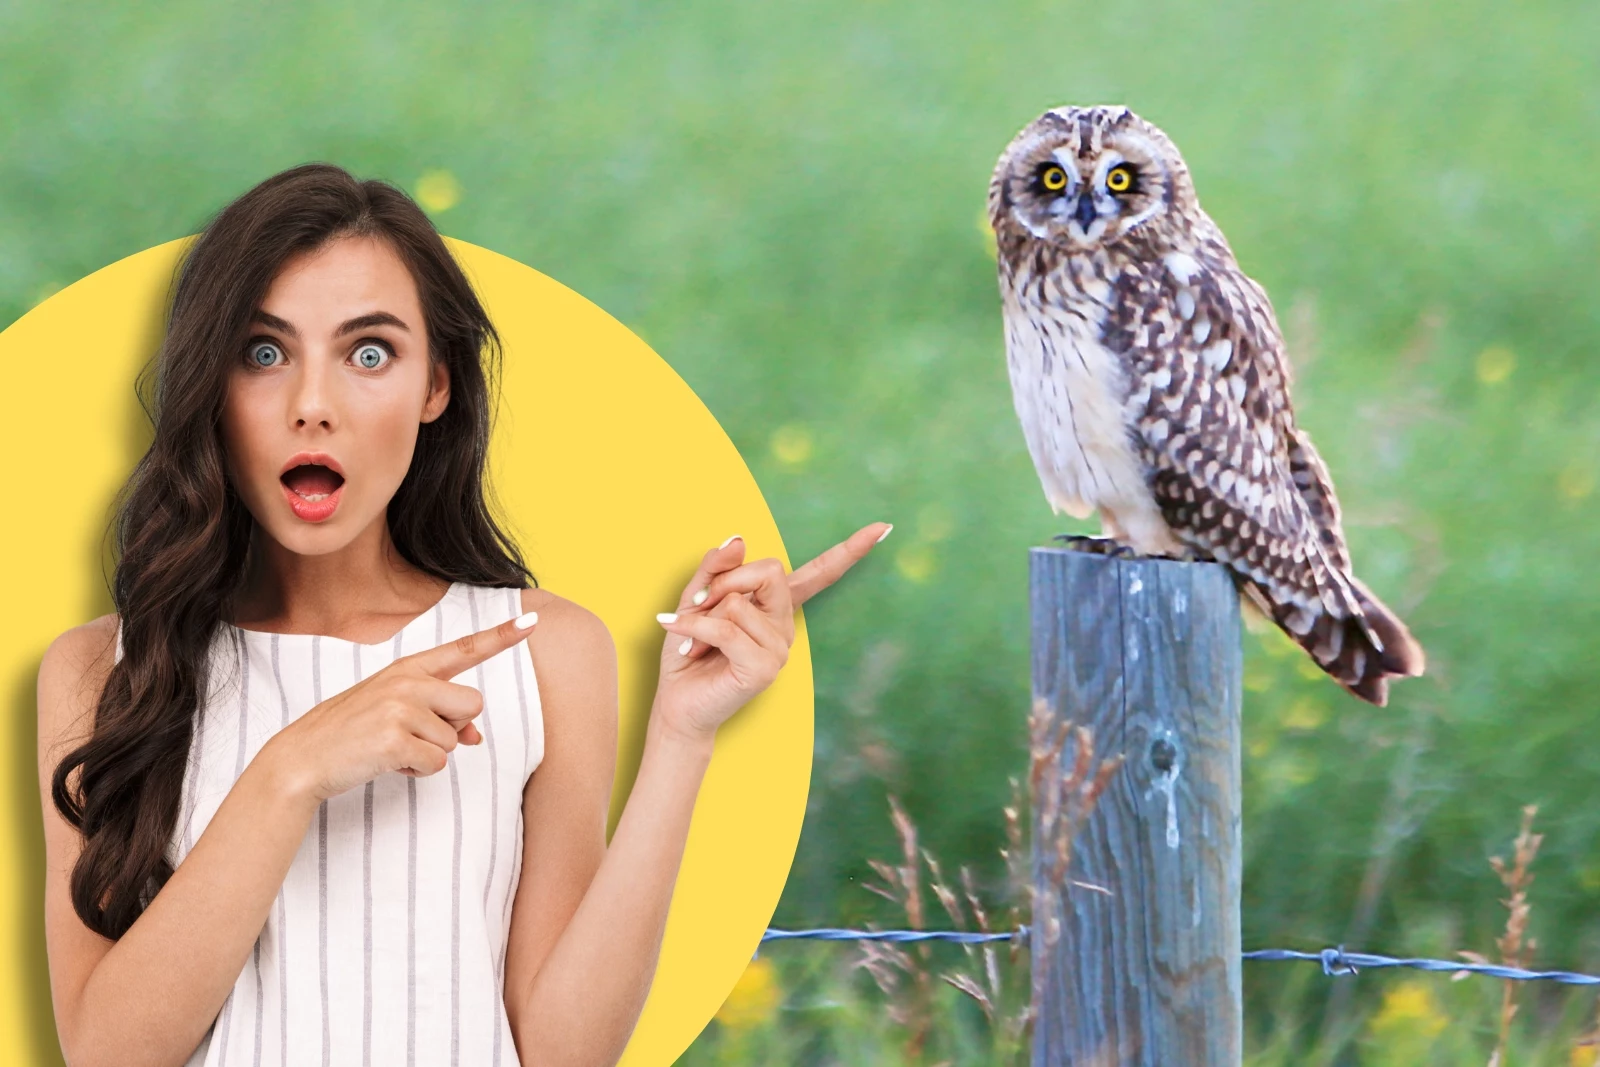 What Does It Mean When You Encounter an Owl?